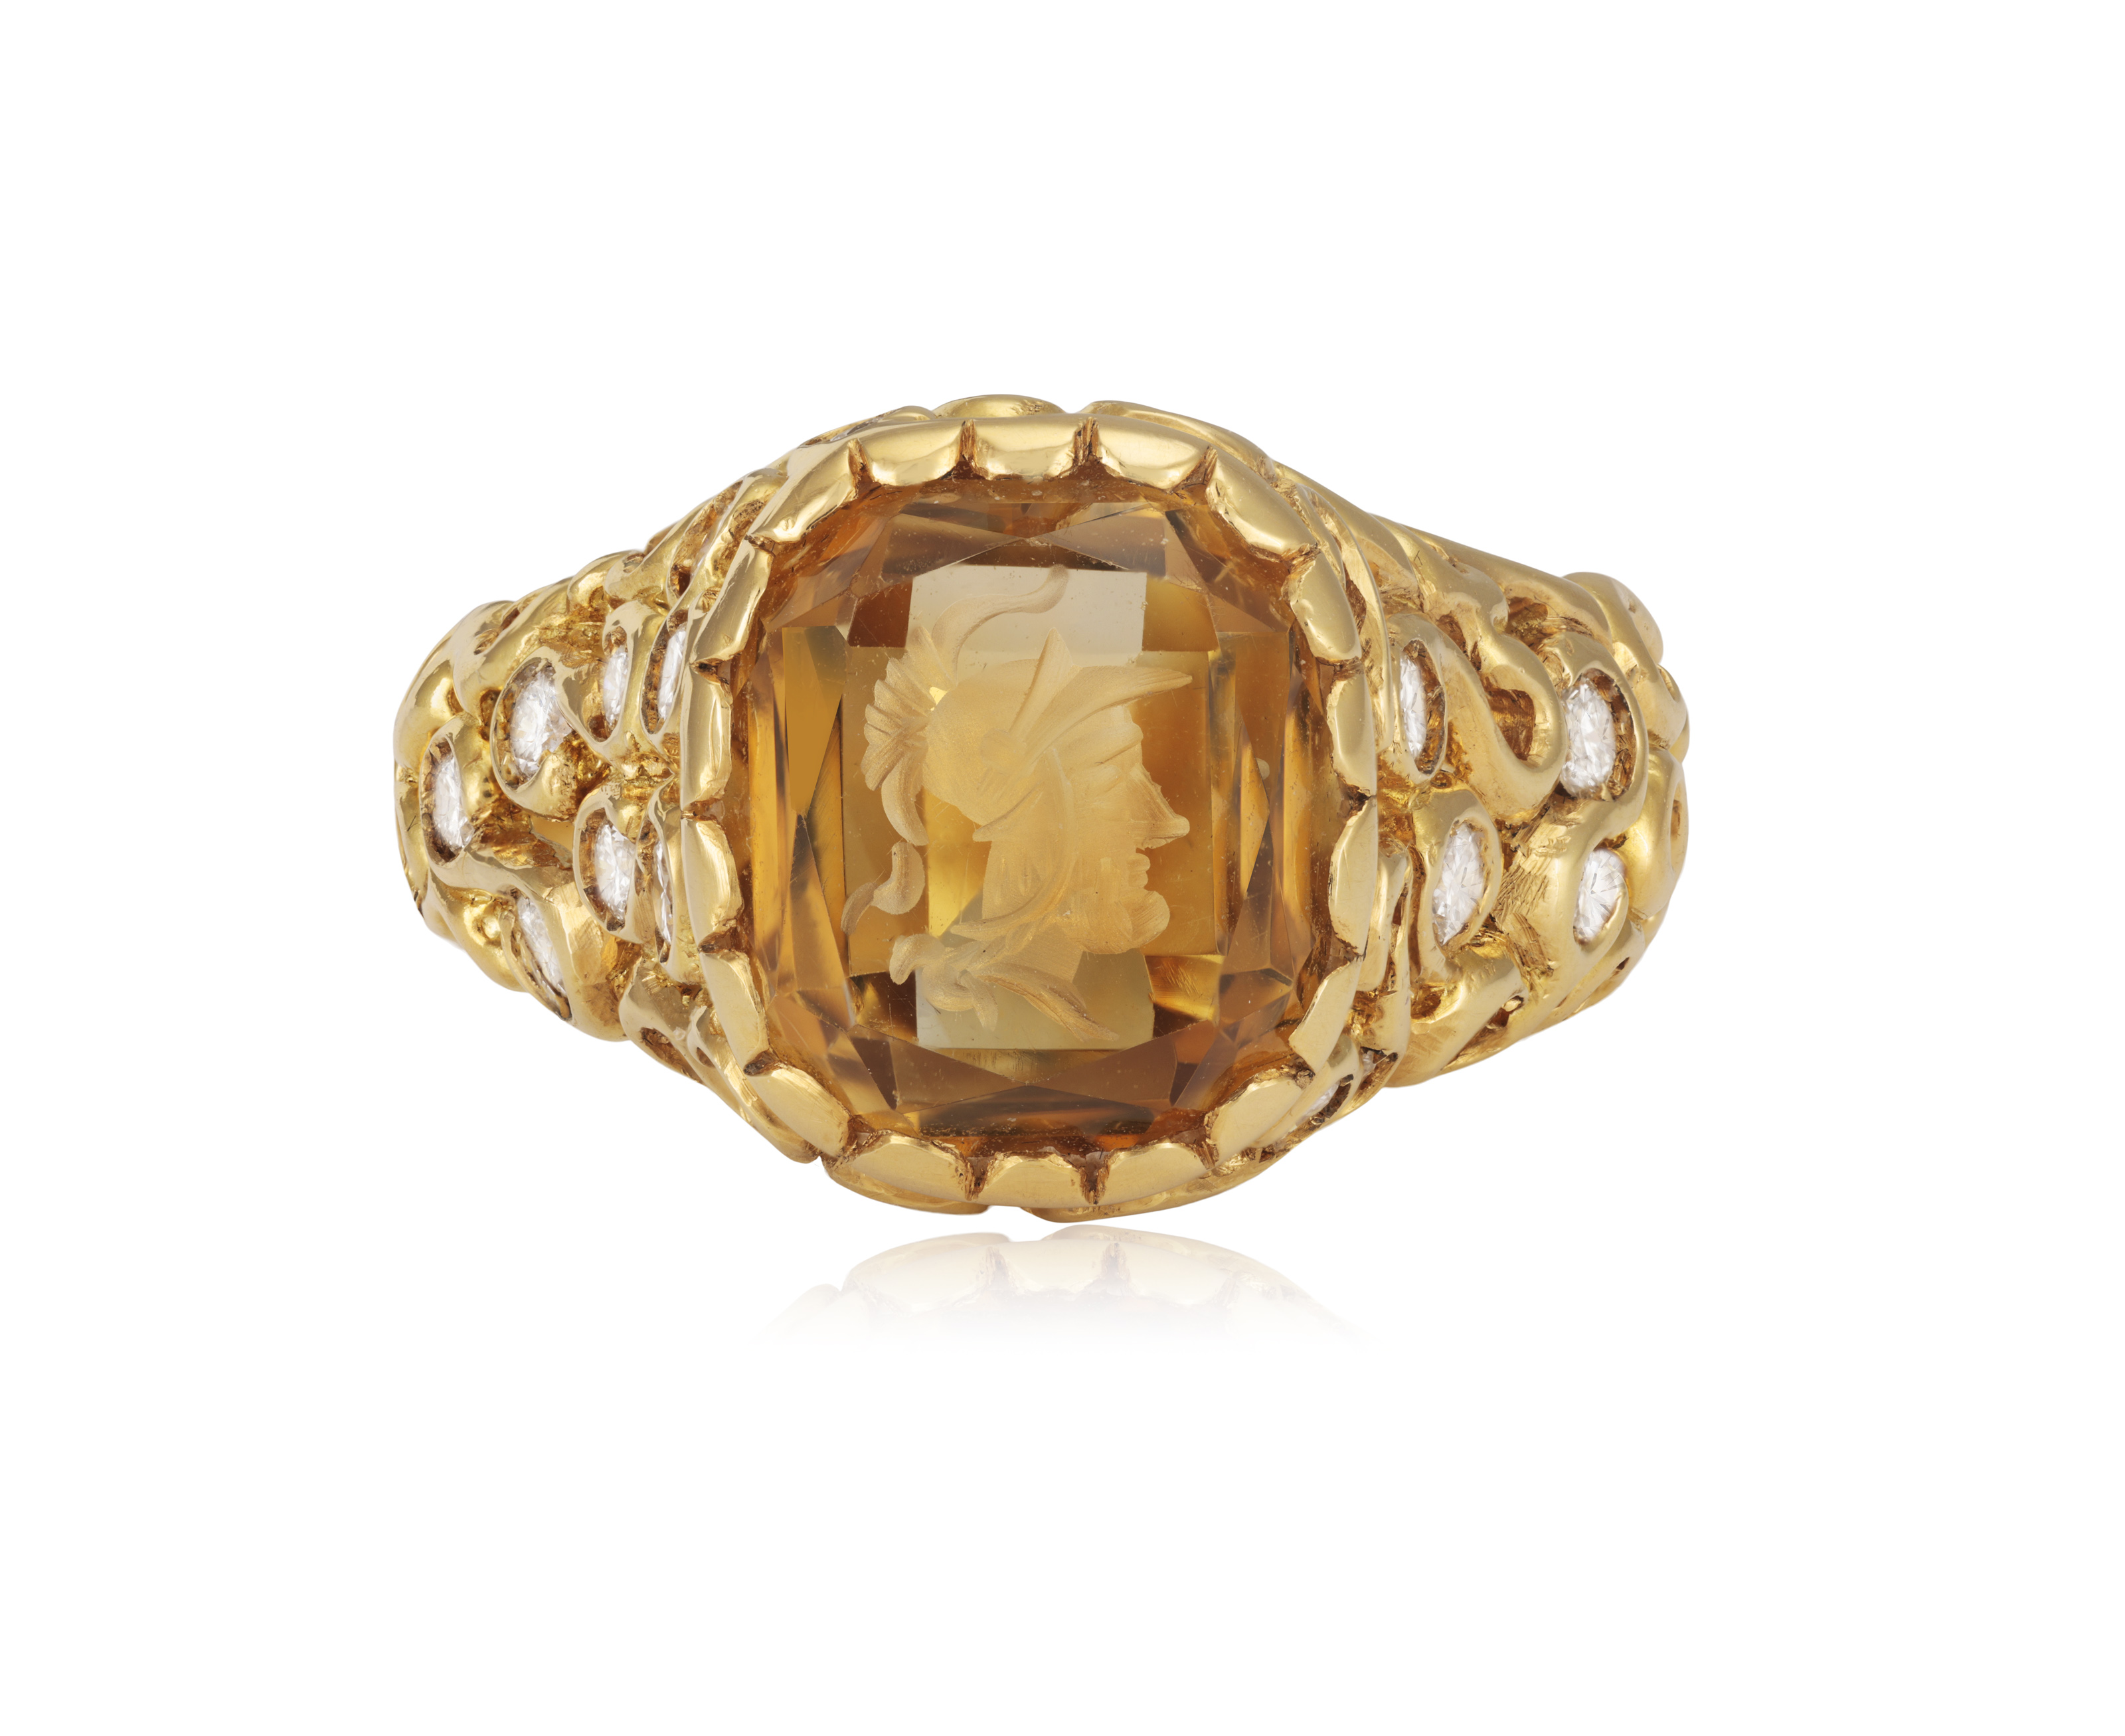 A DIAMOND AND CITRINE INTAGLIO RING The openwork scrolled raised mount, set with brilliant-cut